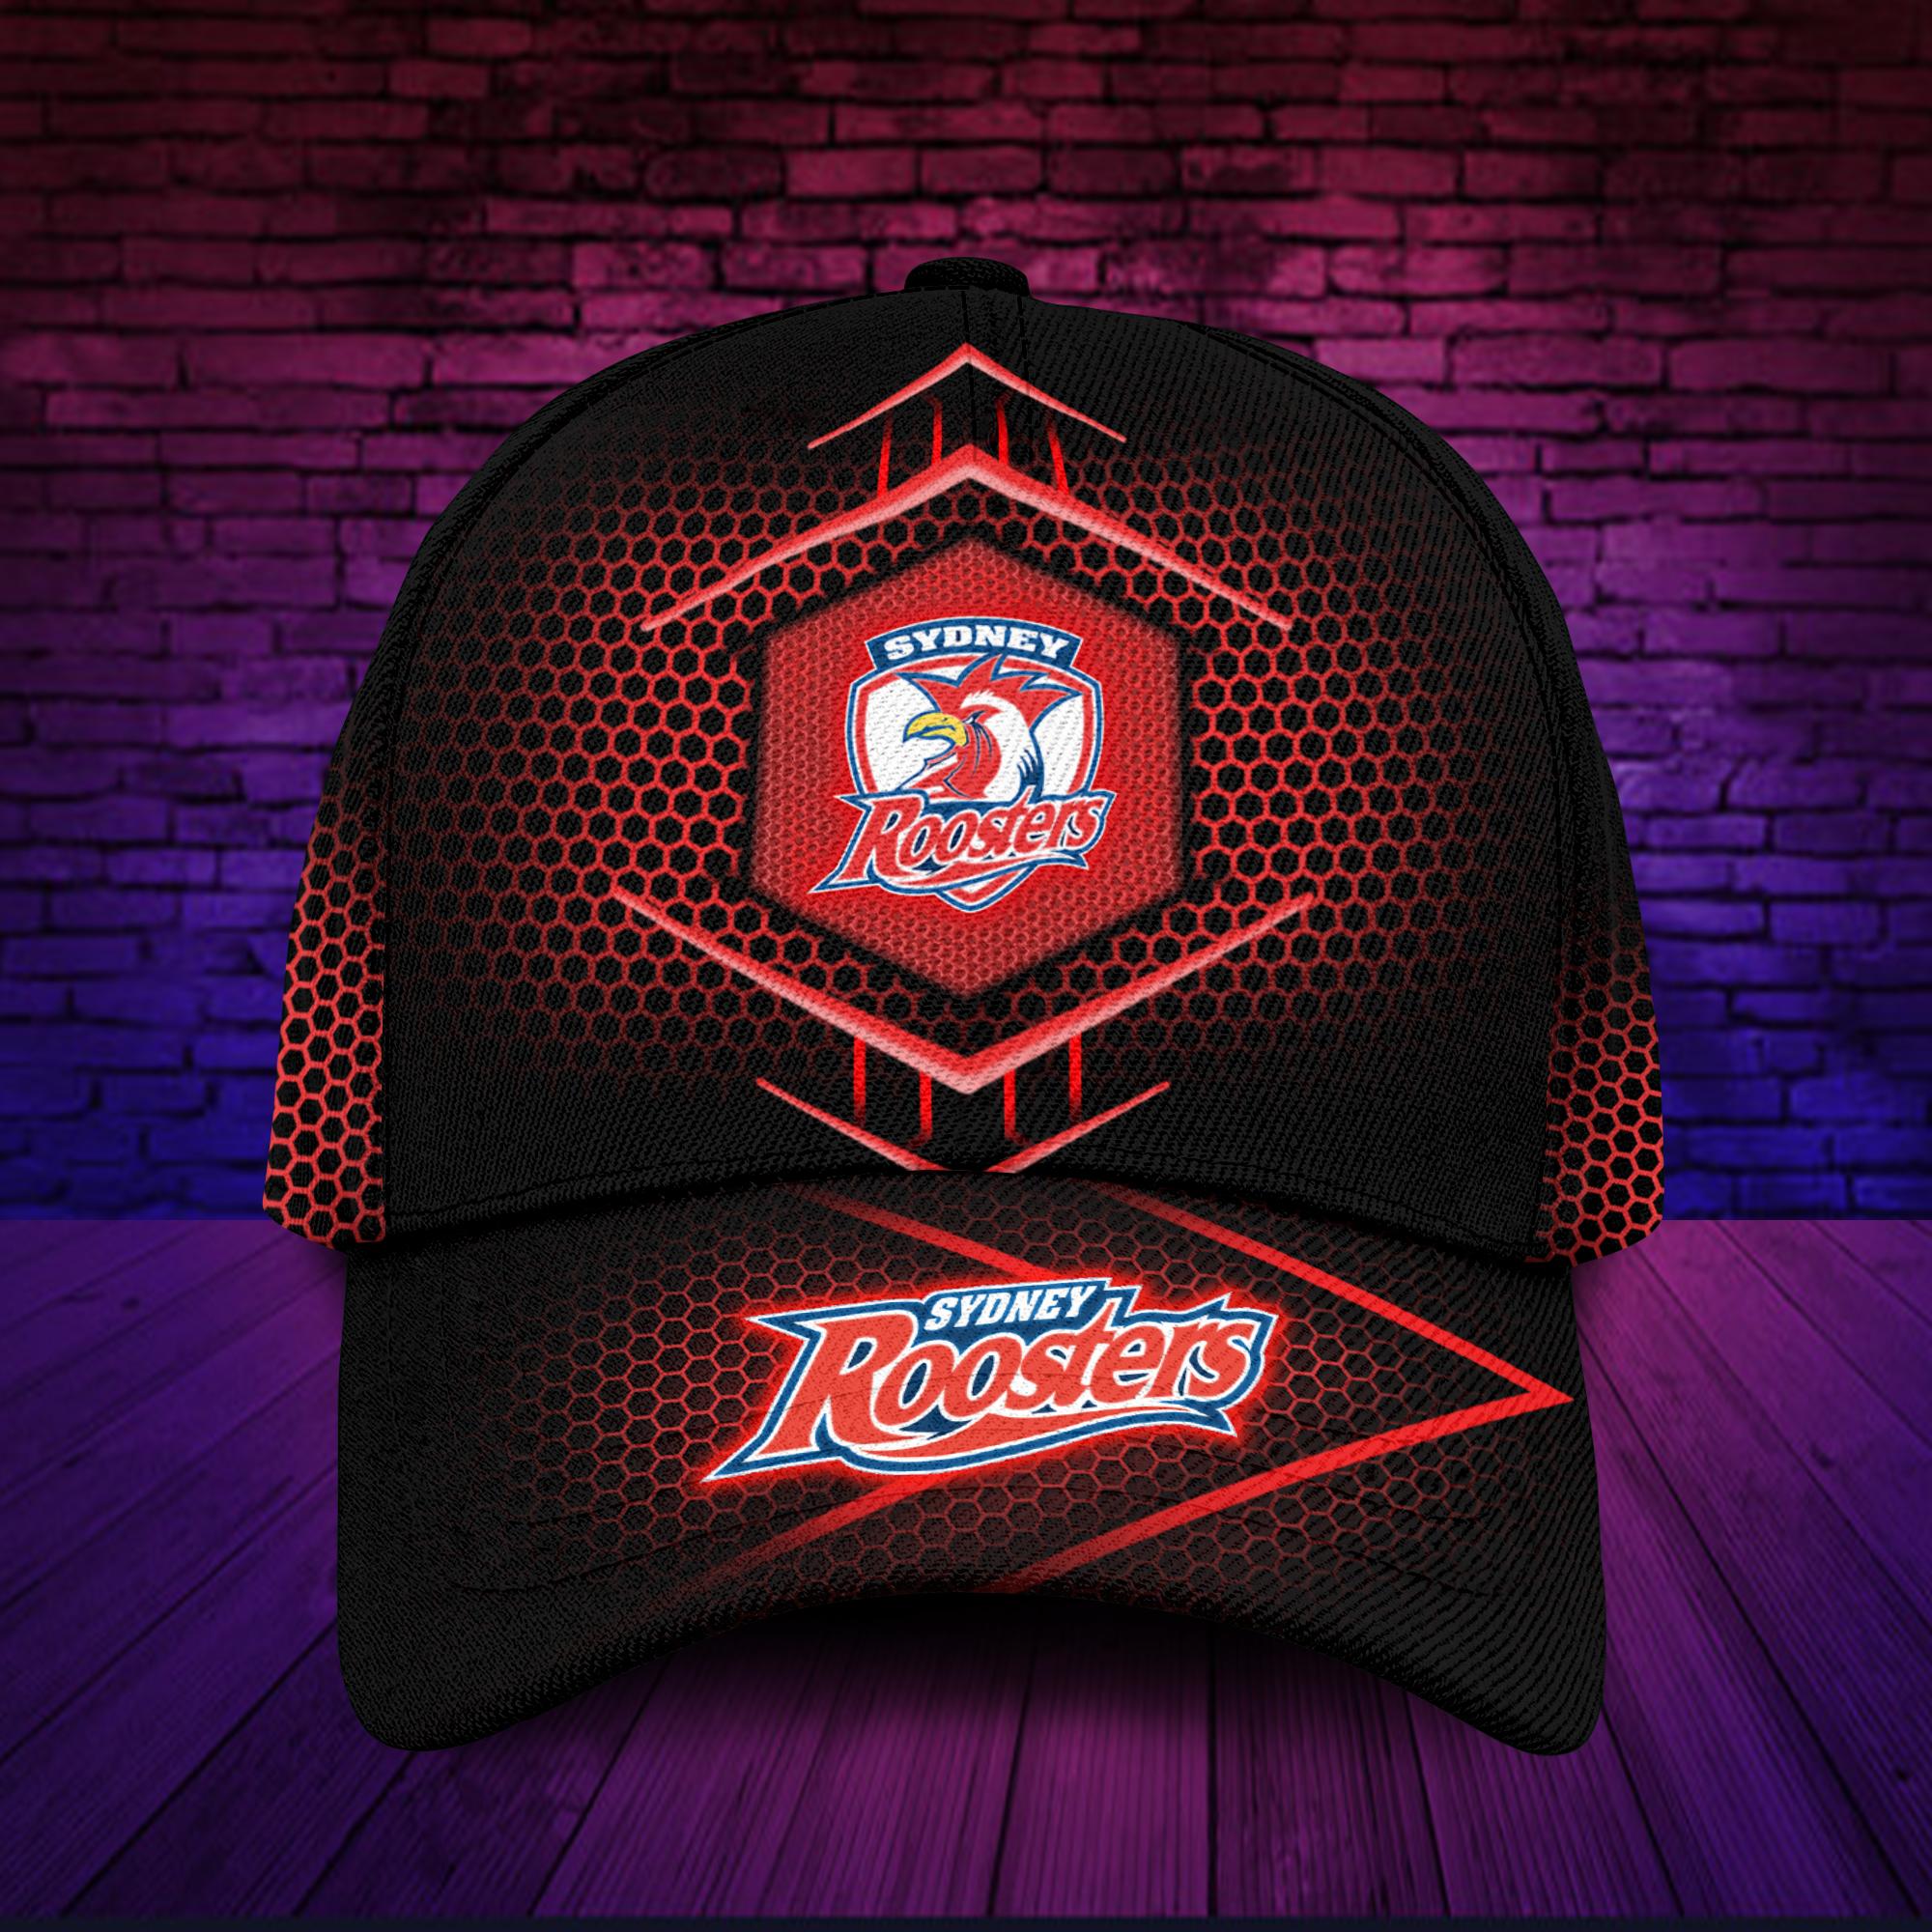 Sydney Roosters NRL Classic Cap